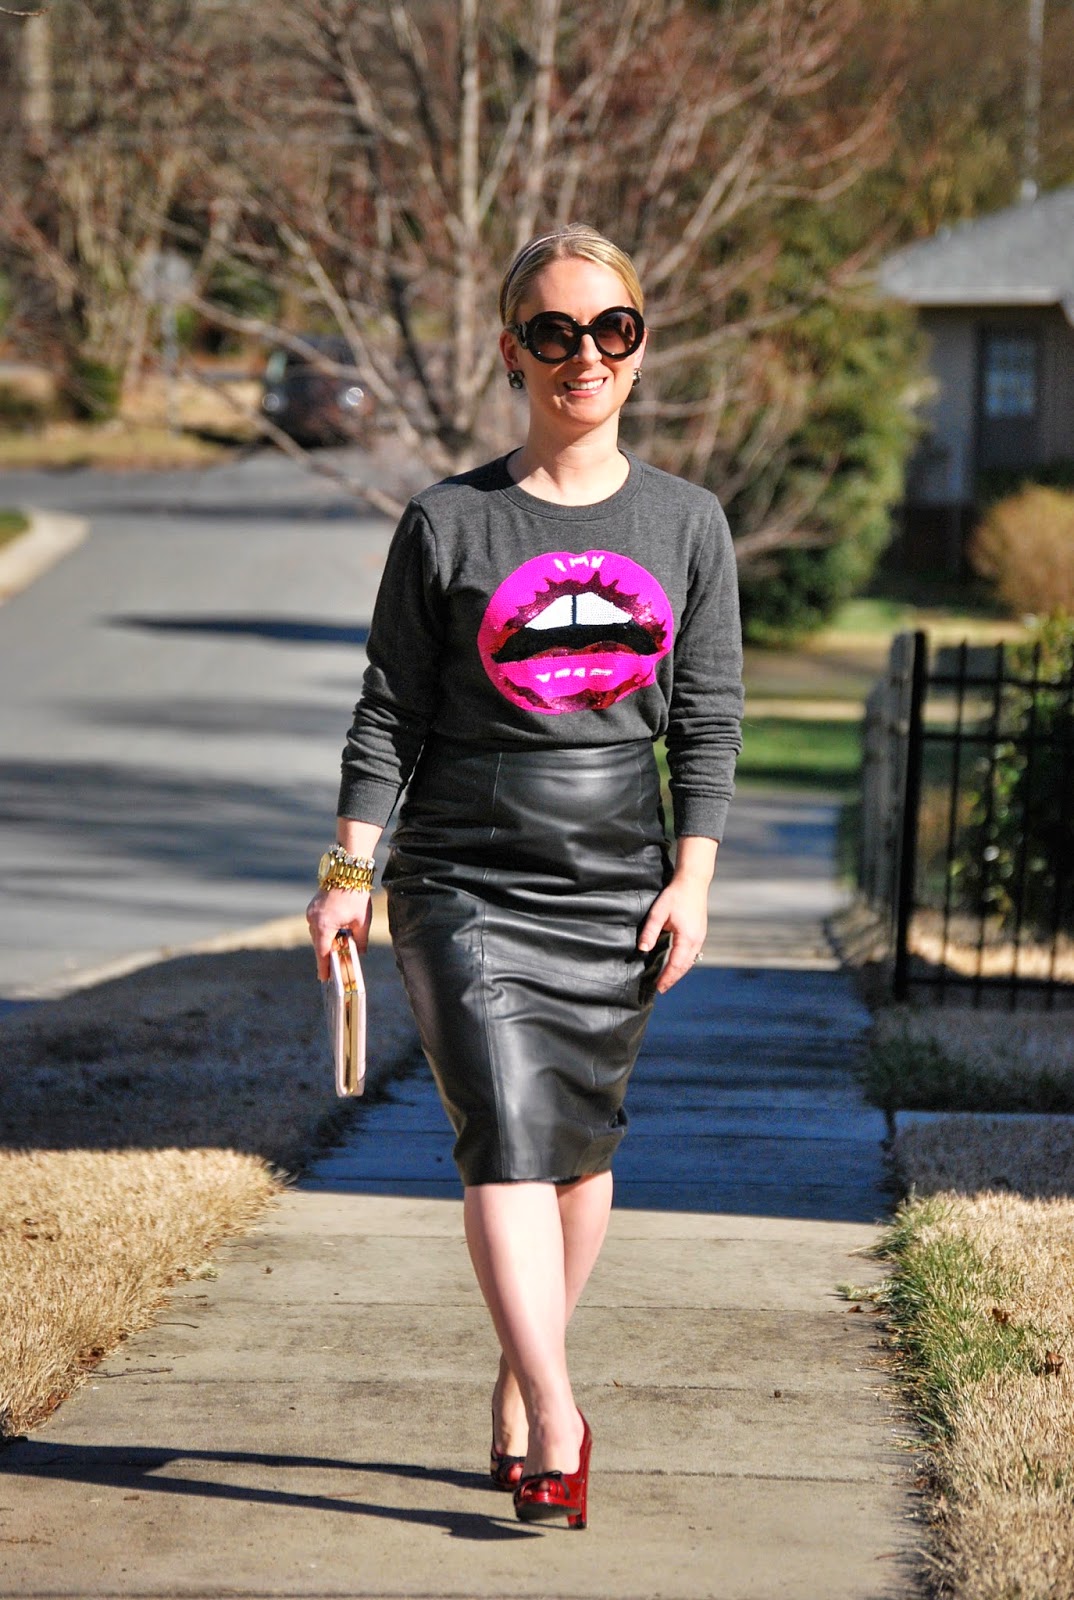 leather pencil skirt, pink pumps, Kate Spade book clutch